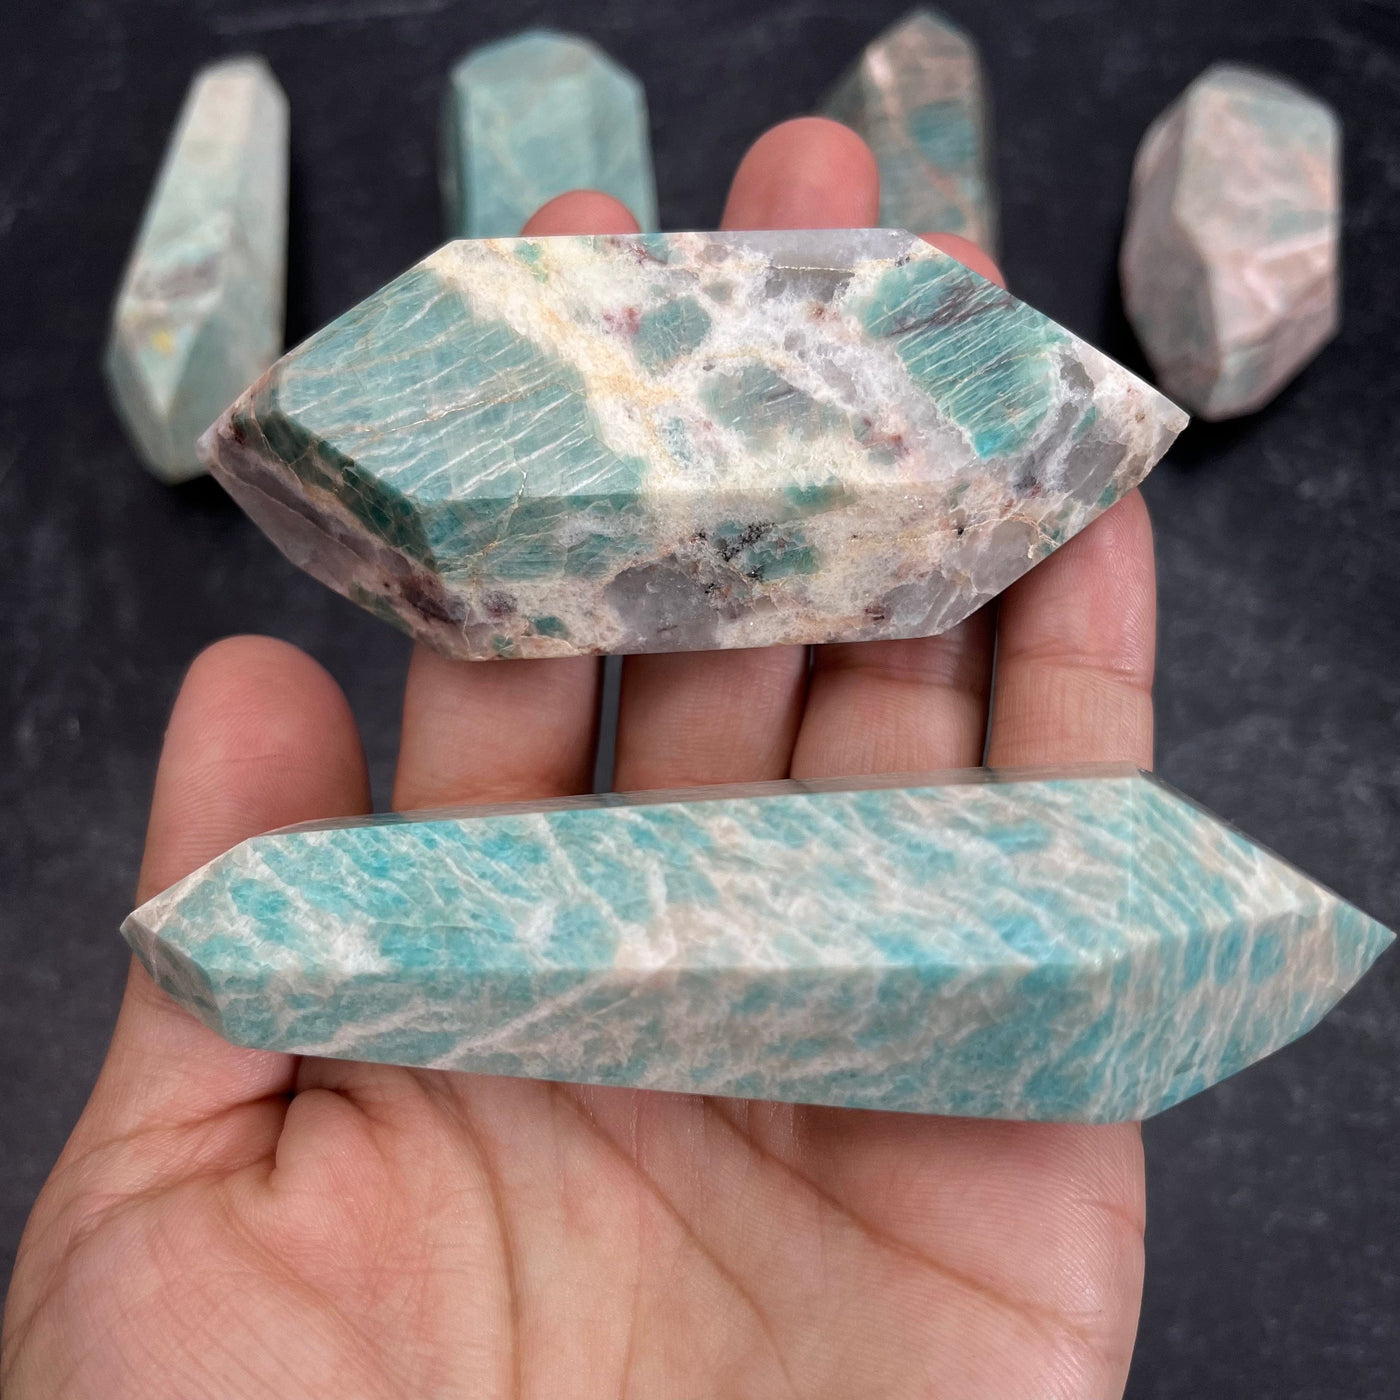 Two Amazonite Polished Double Terminated Points, in the weight range of 100g-150g, laying in palm of woman's hand.